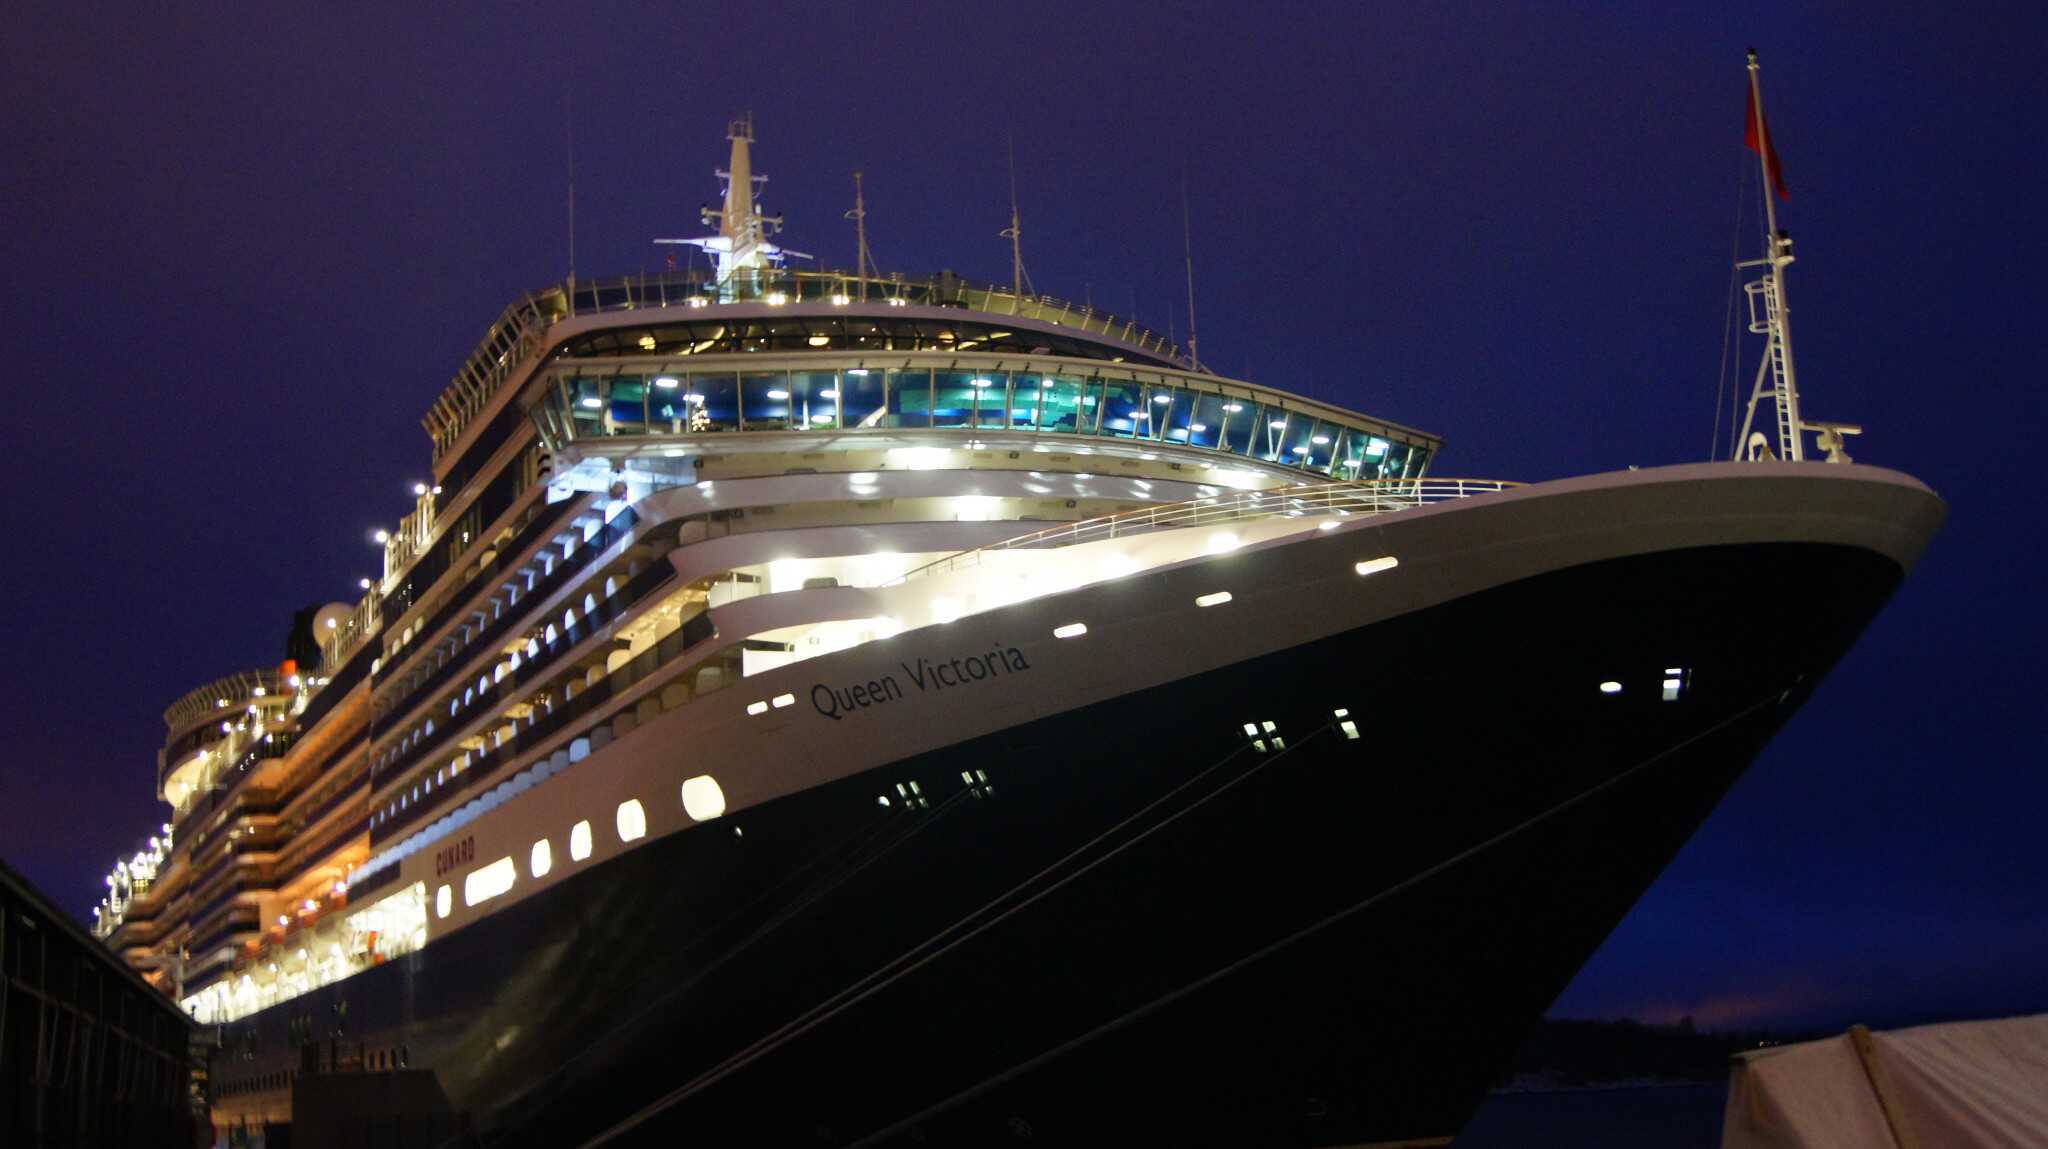 Queen Victoria at dusk in the port of Oslo